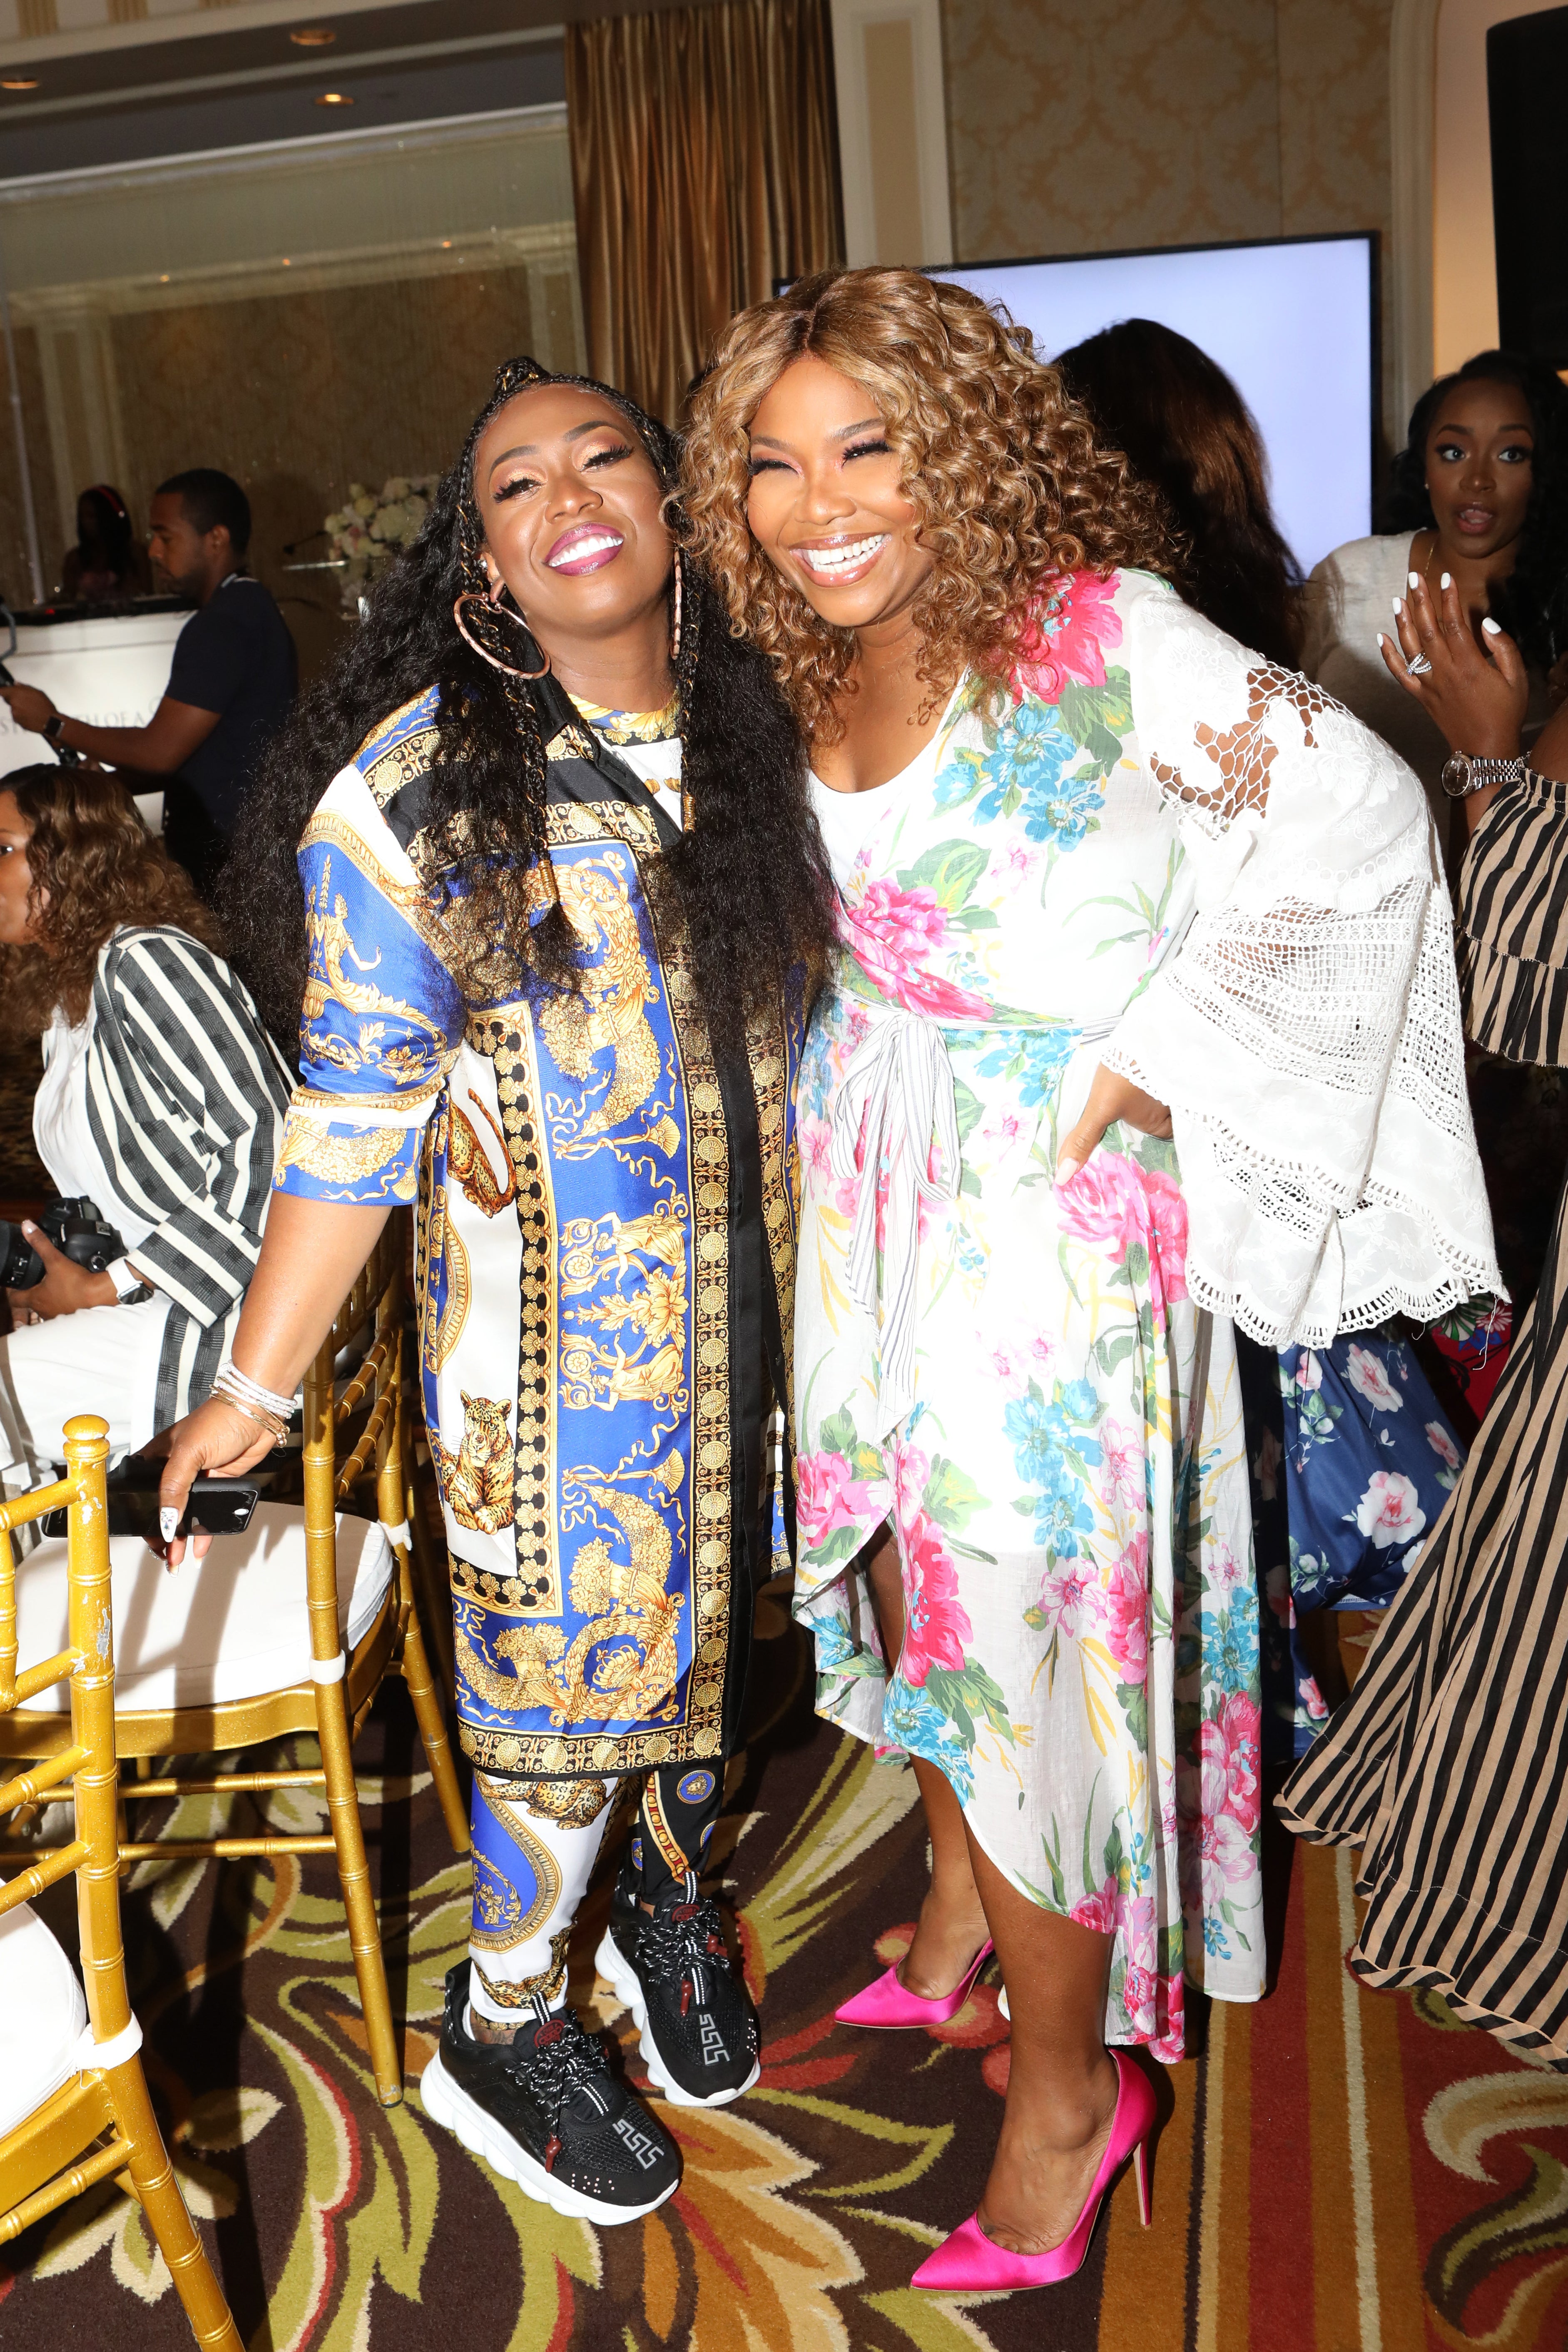 Welcome To The Dancery: Mary J. Blige Hosts Epic Brunch At ESSENCE Fest
